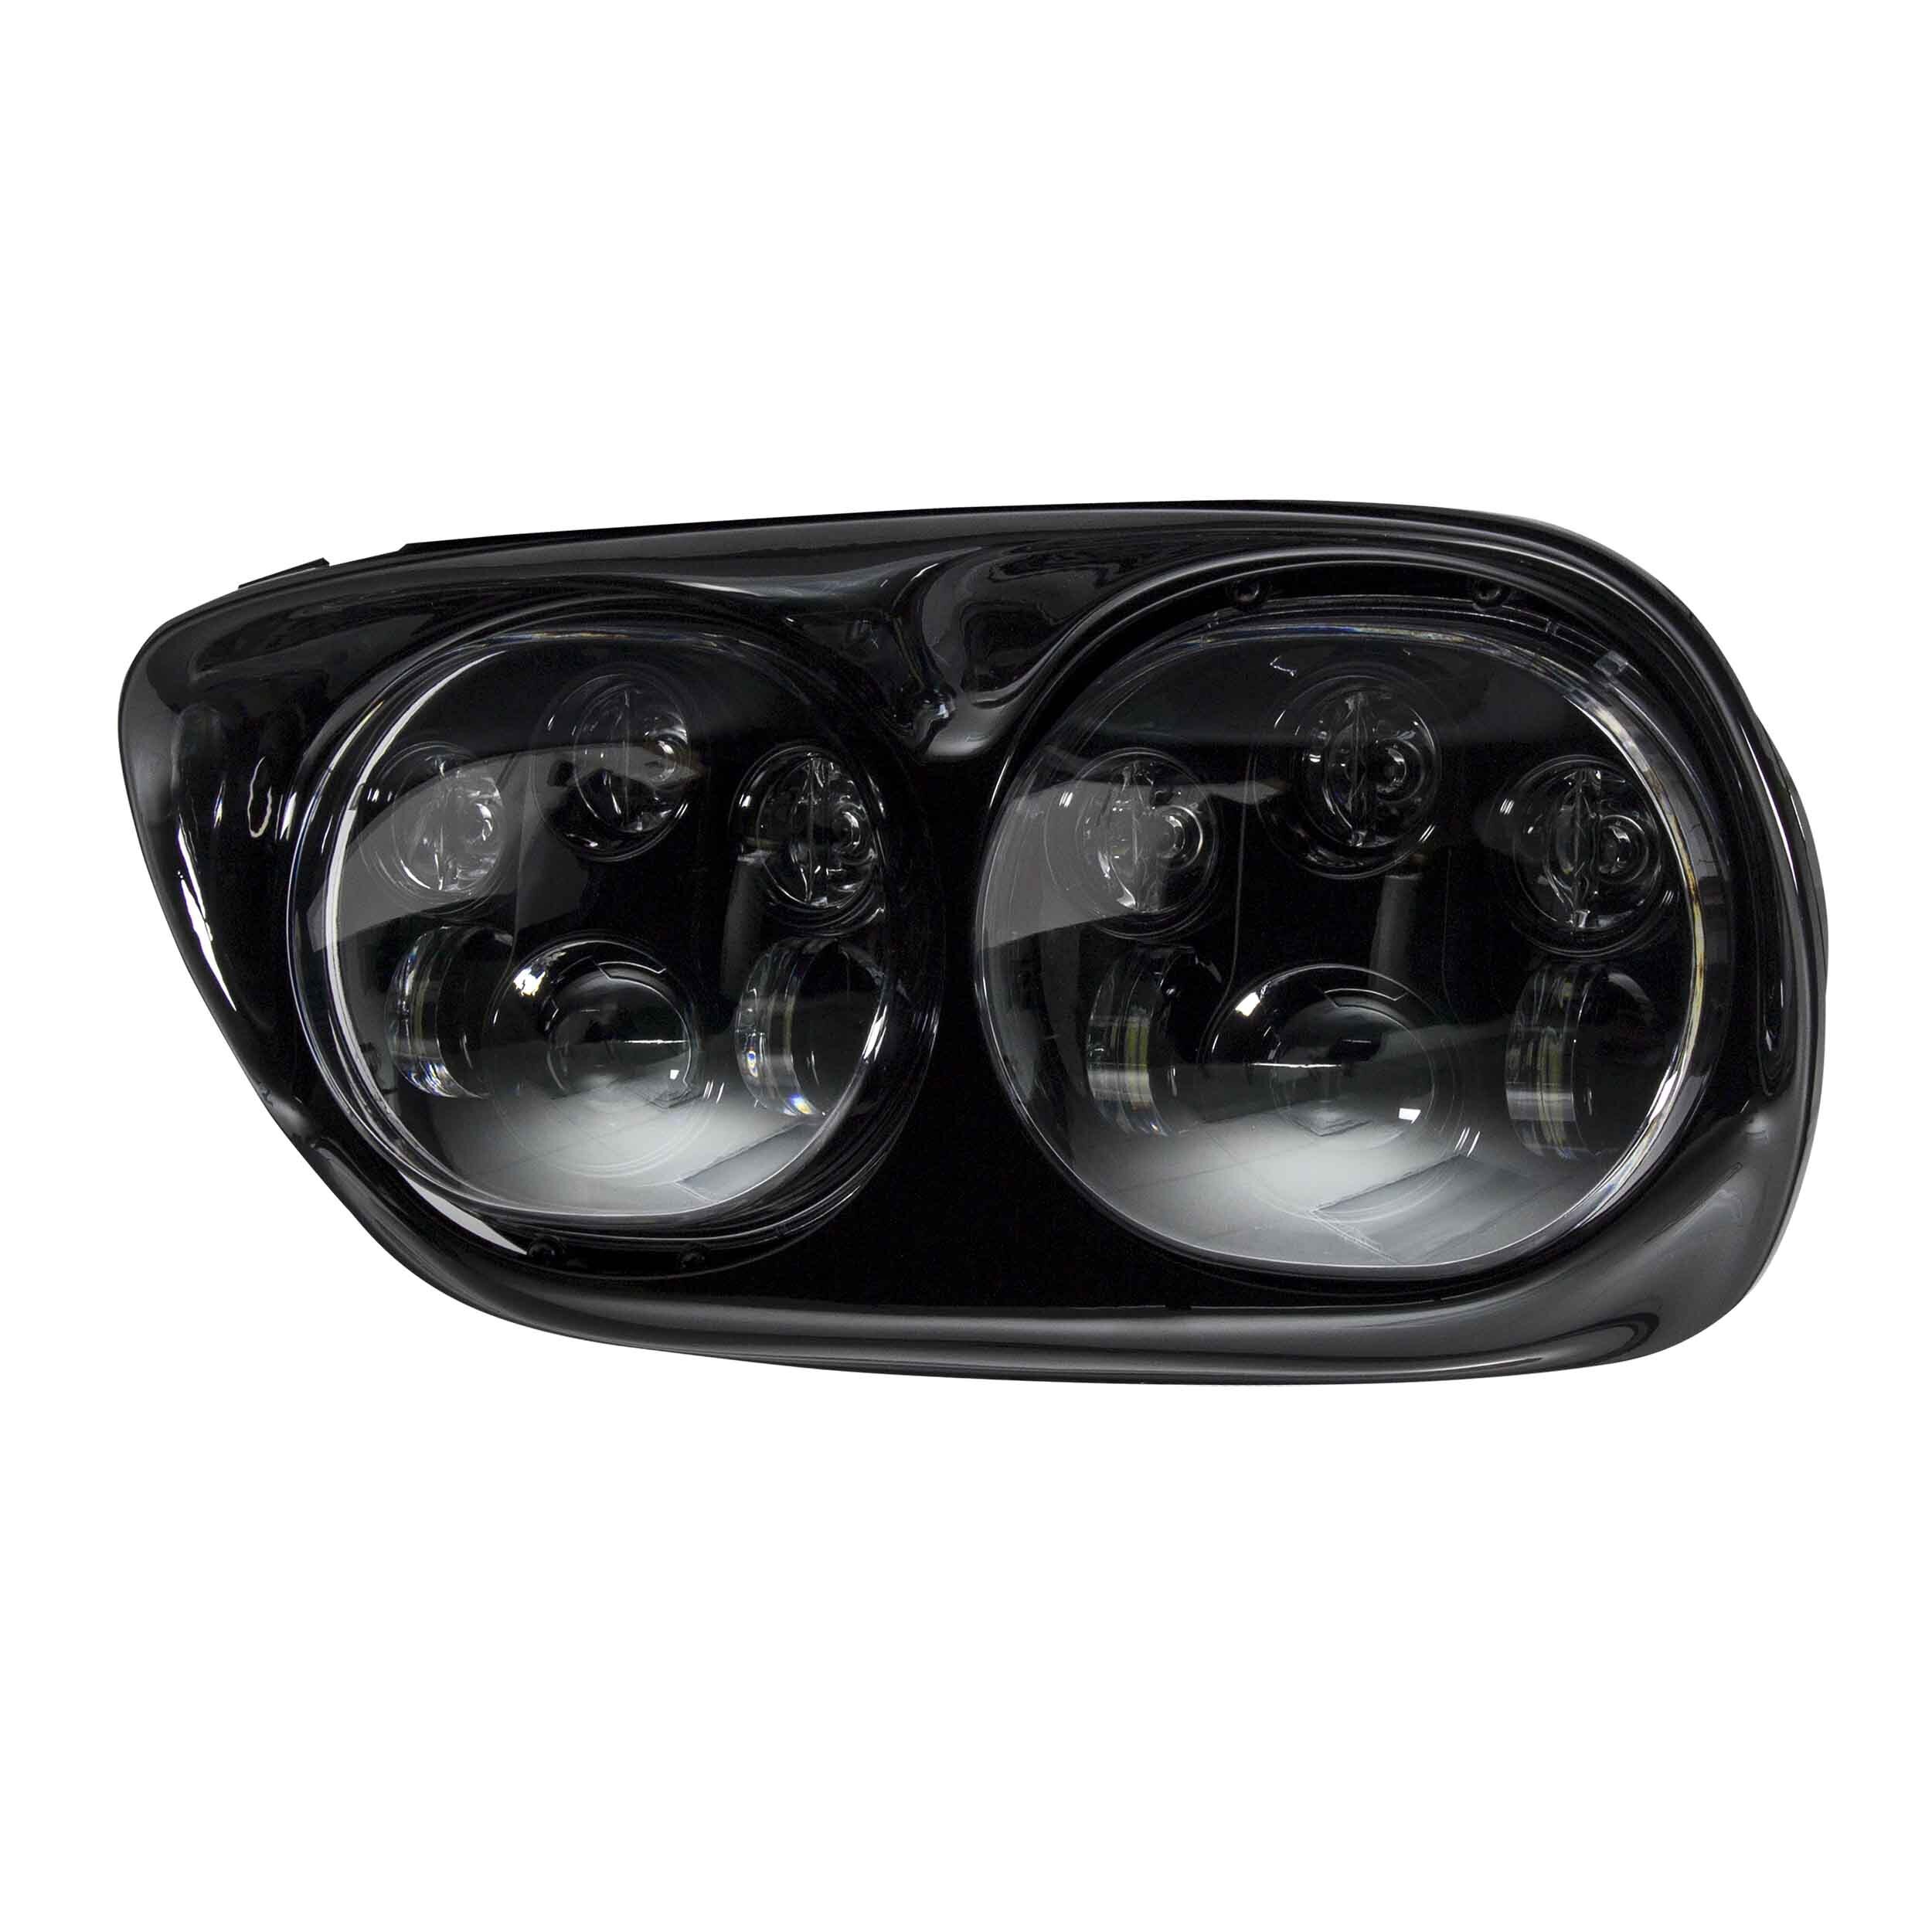 Dual Round Motorcycle Headlights with Black Face - 5.6 Inch